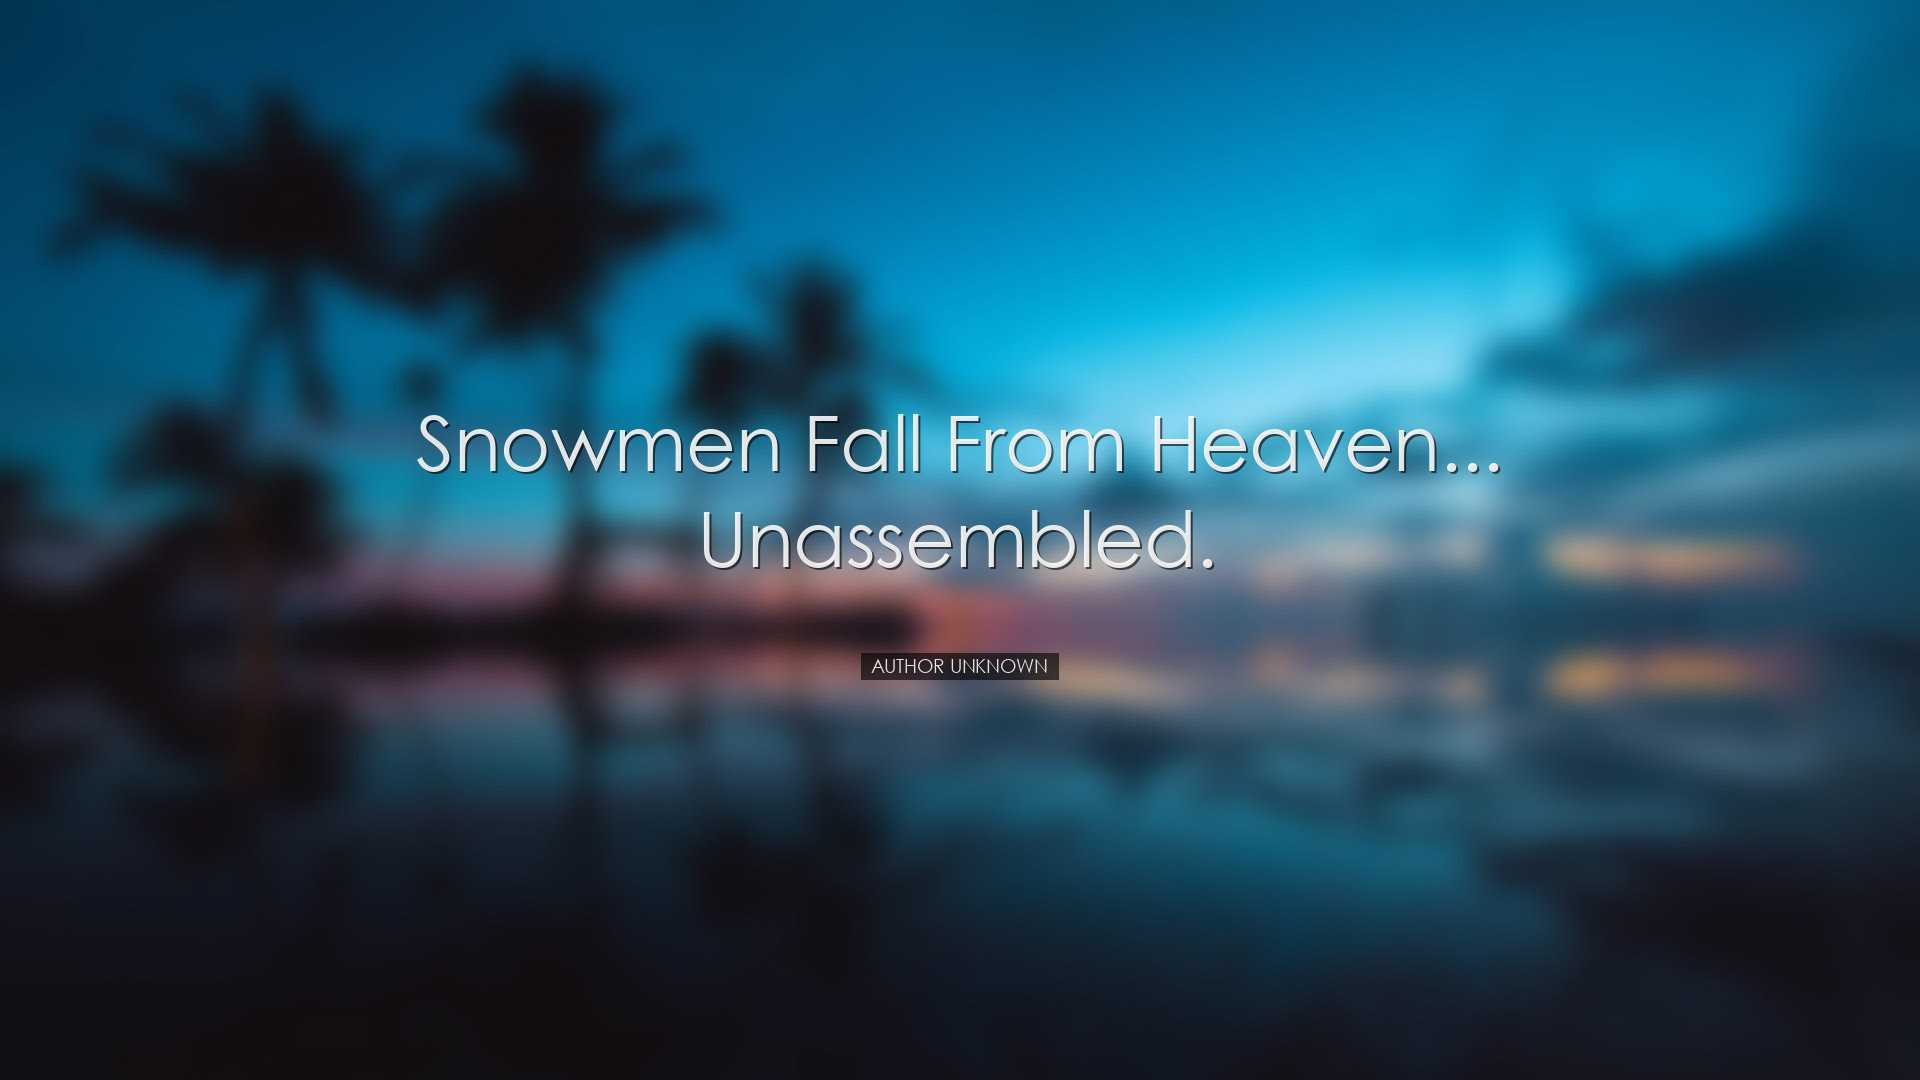 Snowmen fall from heaven... unassembled. - Author unknown